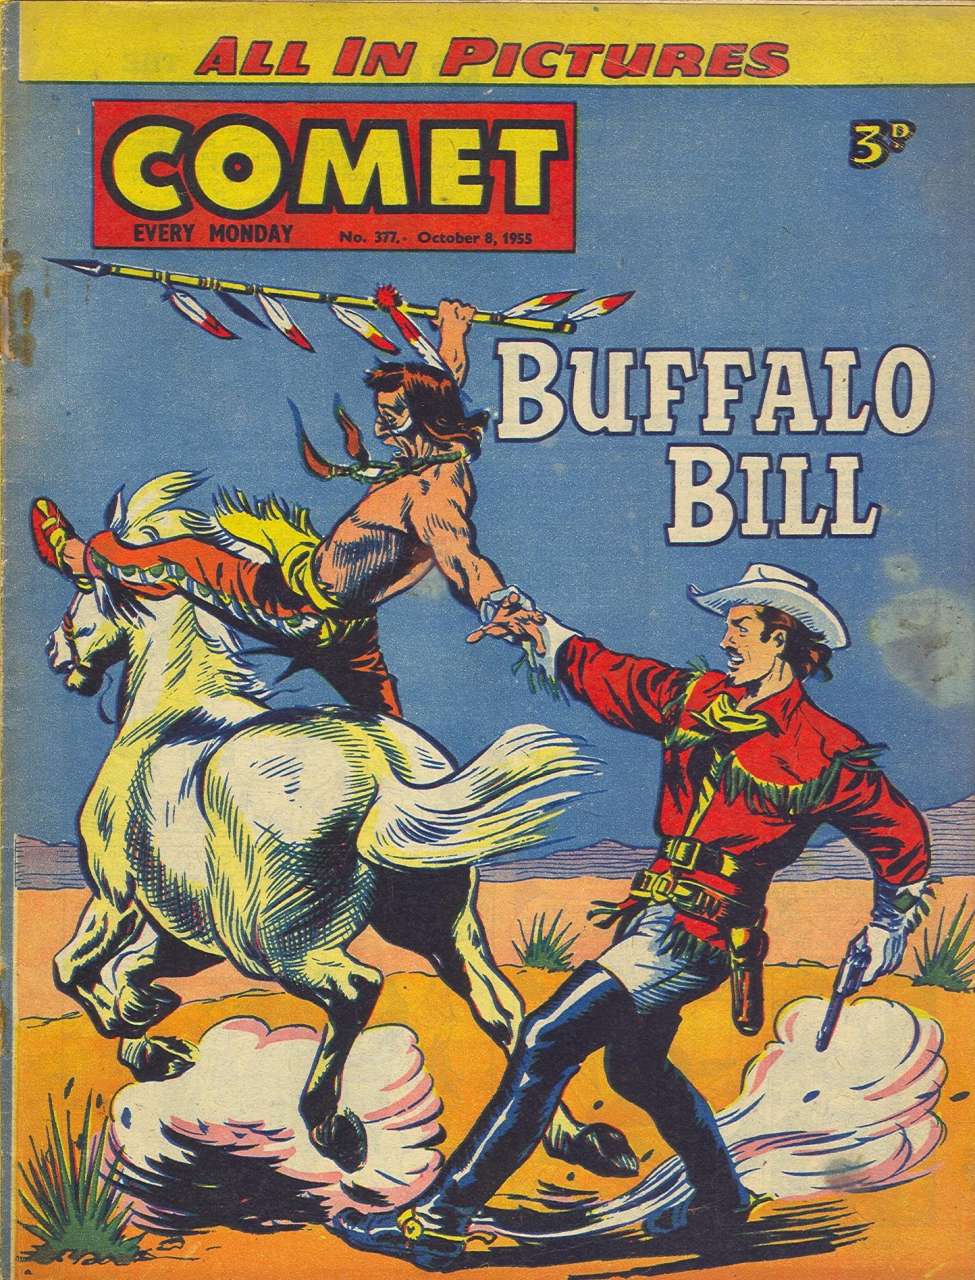 Book Cover For The Comet 377